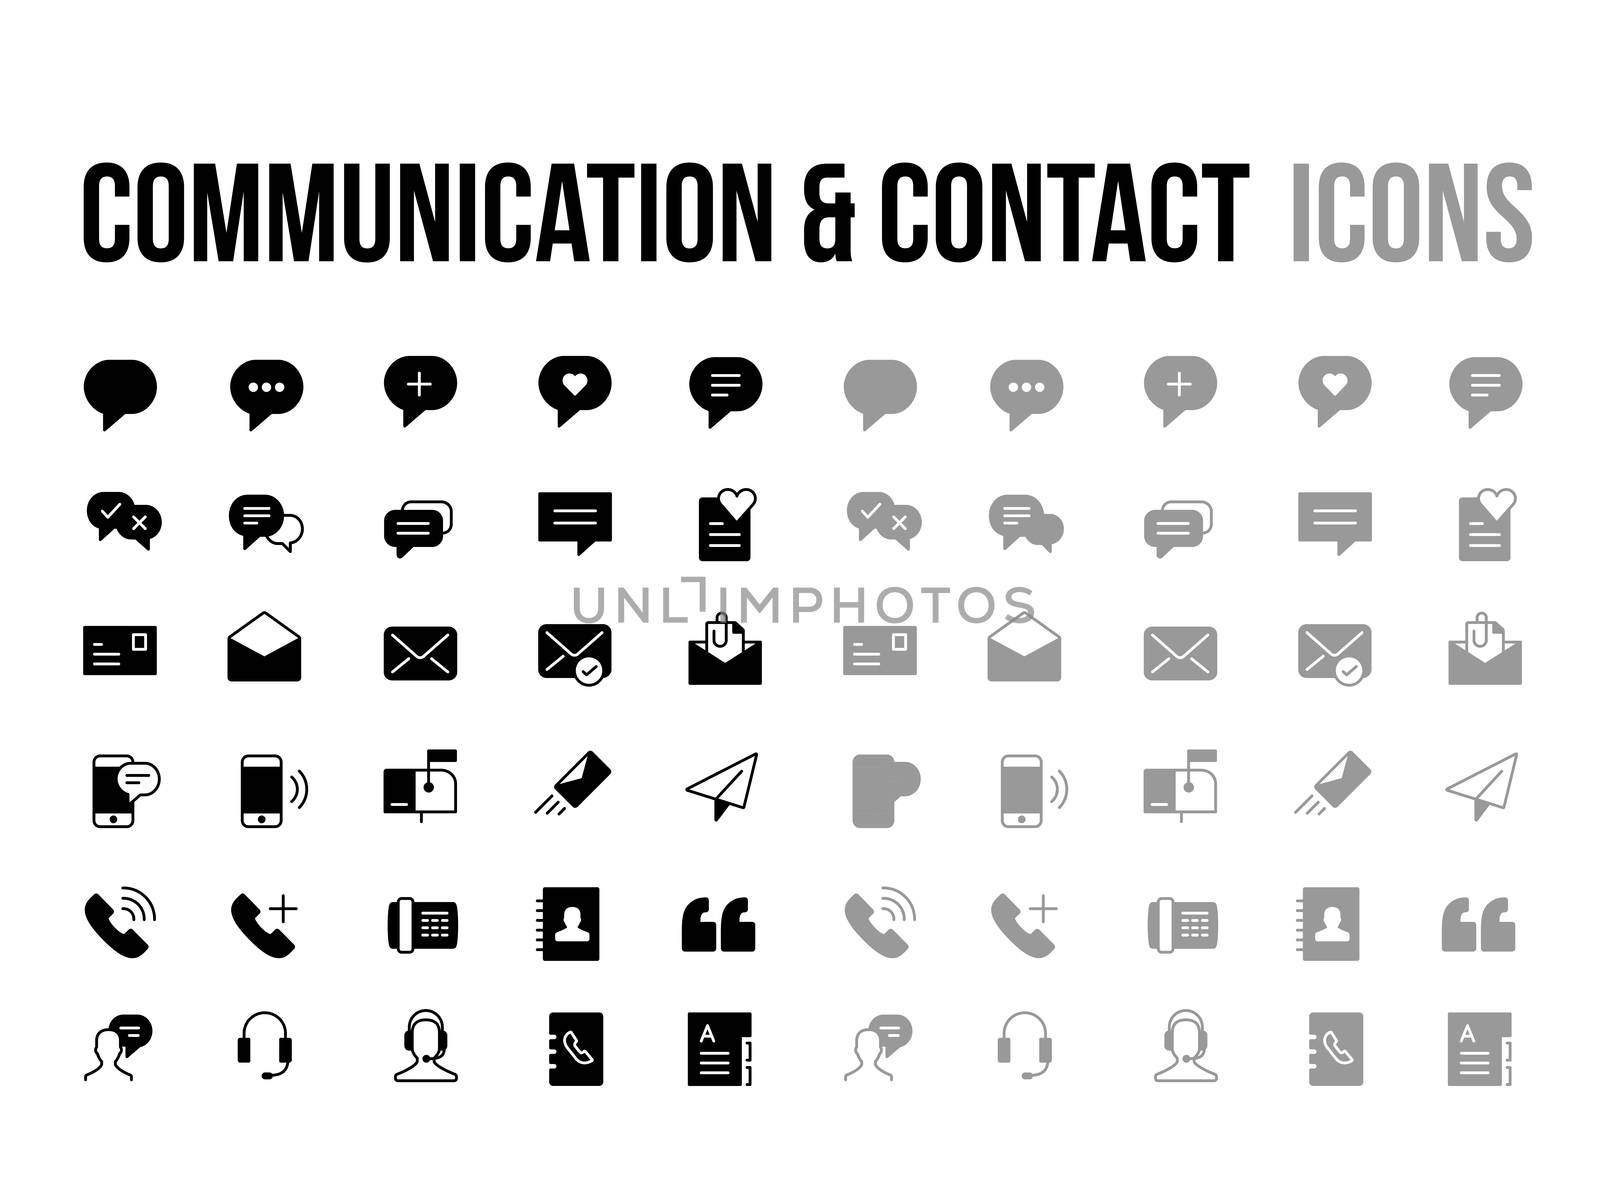 Customer support, contact, messaging, communication vector icon - app and mobile web responsive	
